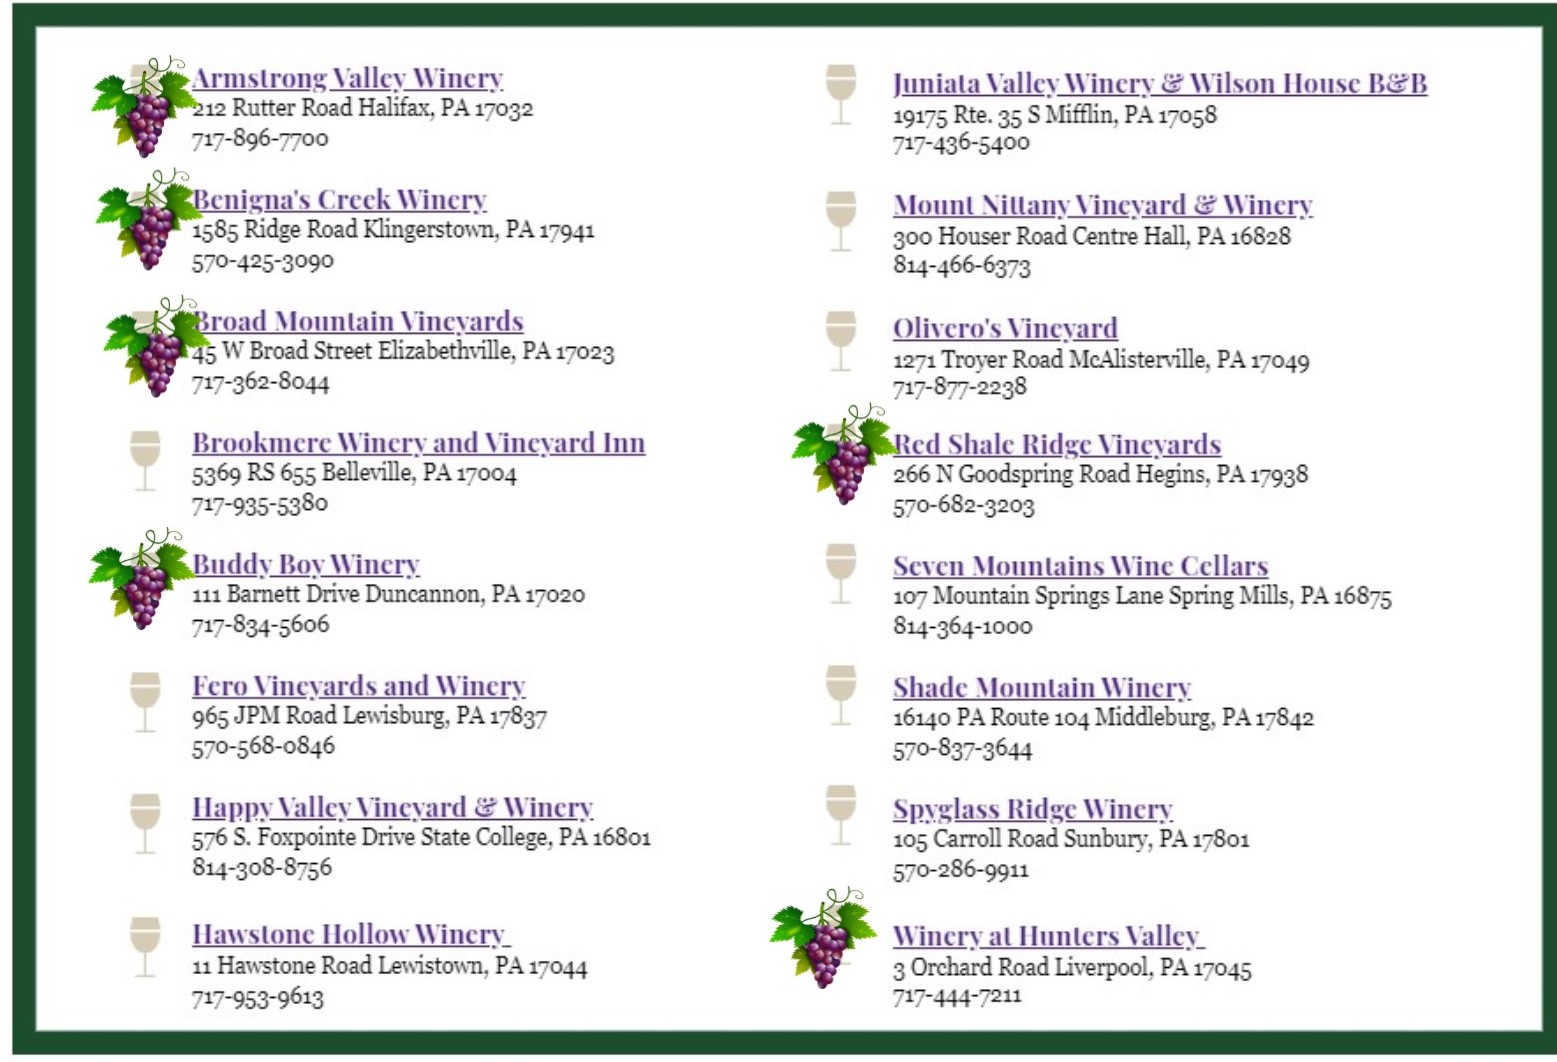 Outgoing Wine Flights - Catch Yours! - Mount Nittany Vineyard & Winery